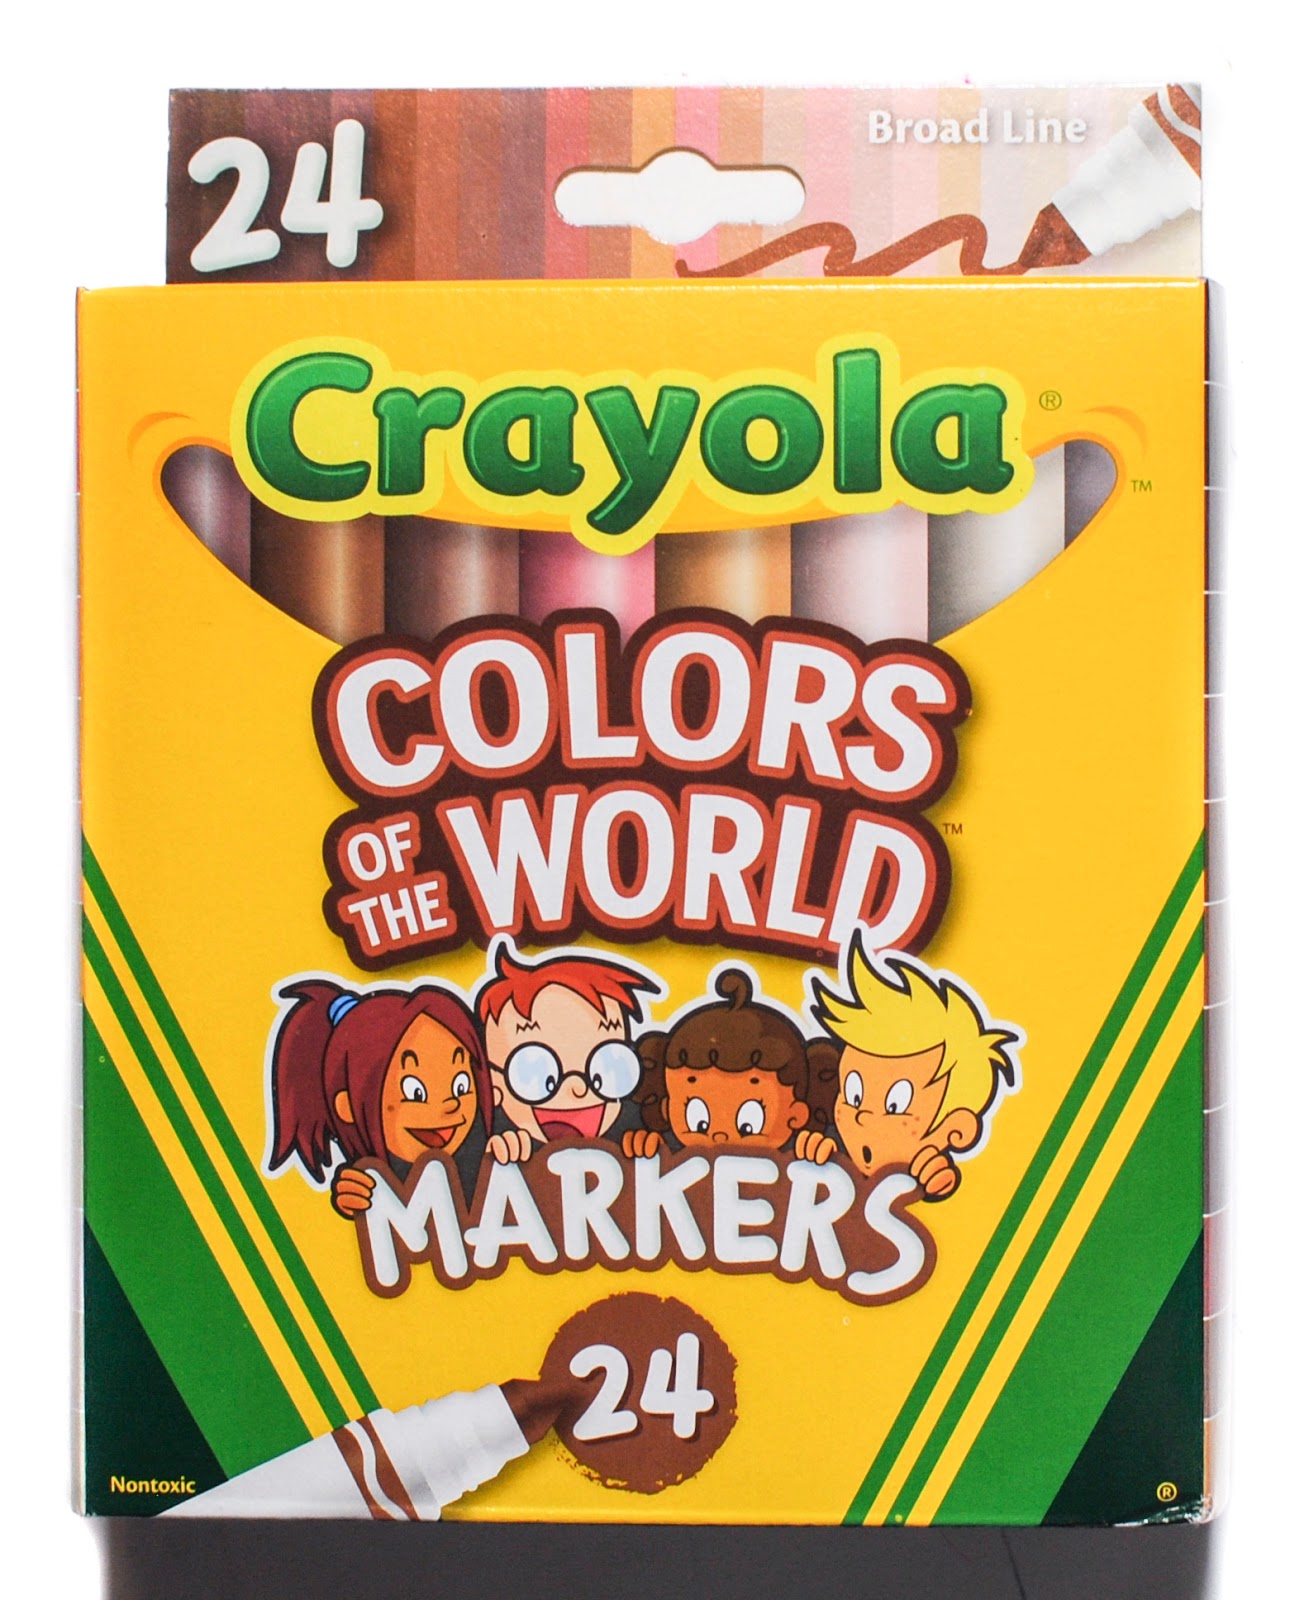 24 Crayola Colors of the World Markers Review and Swatches